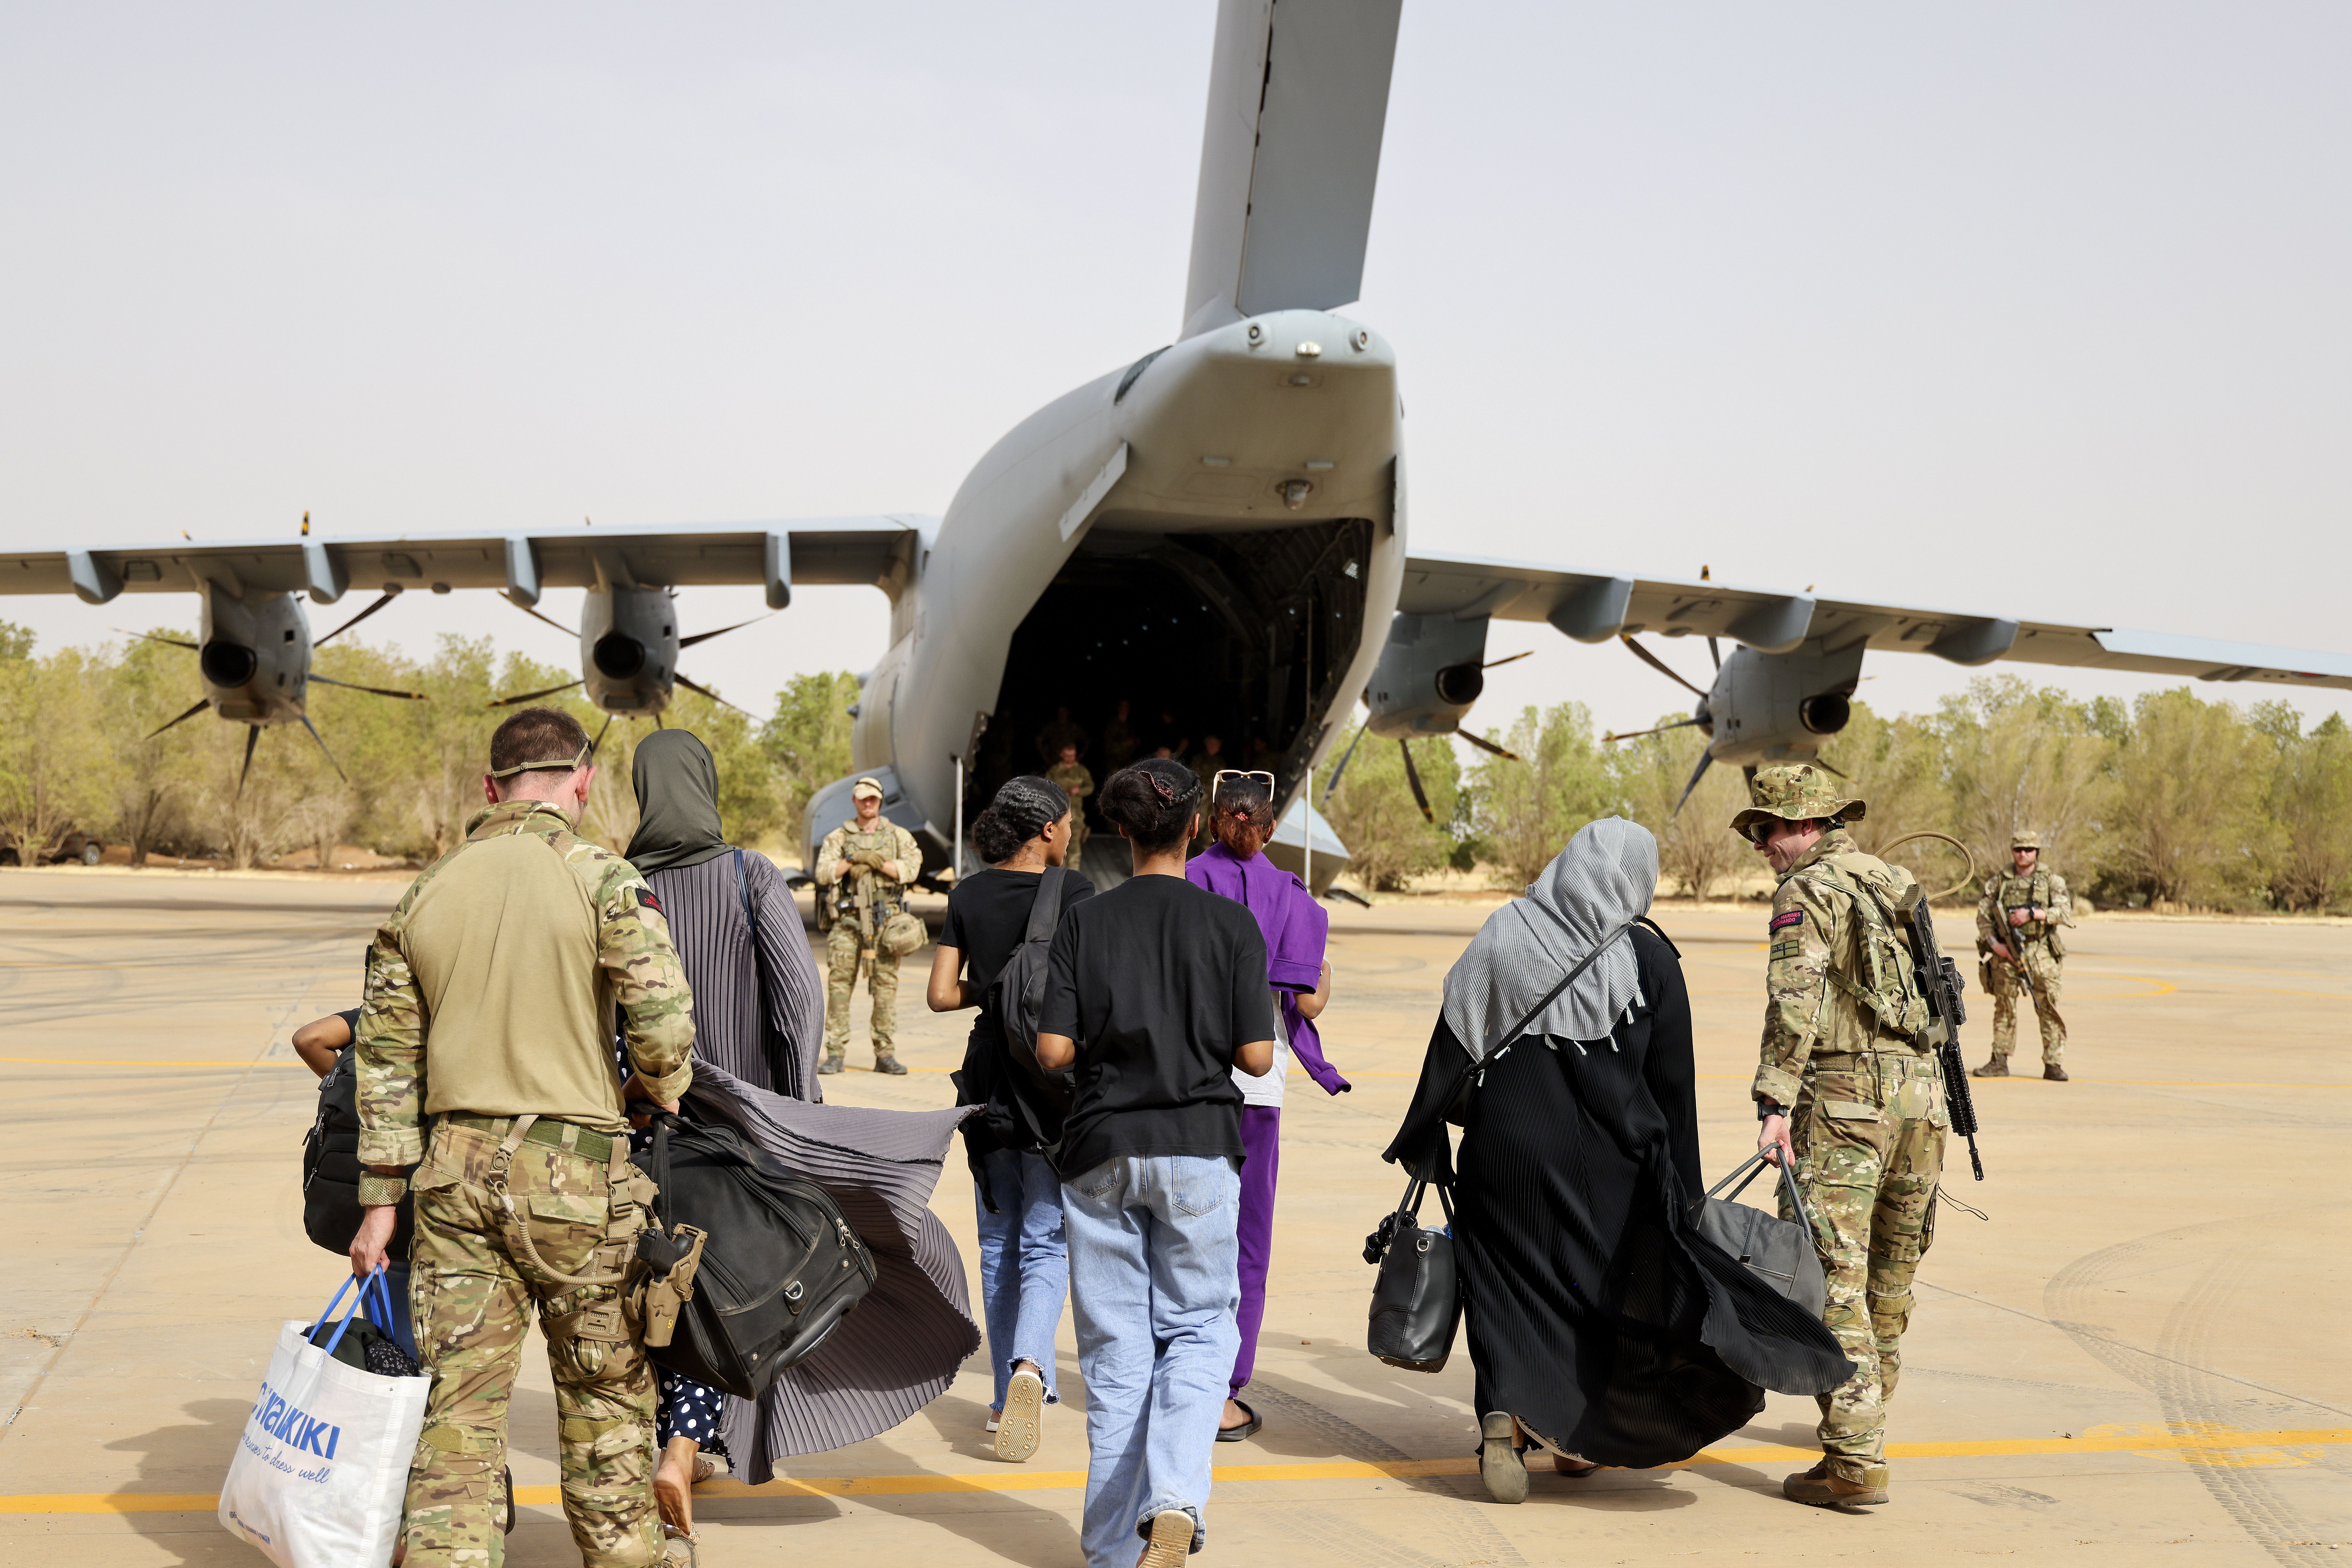 Britons Urged to Leave Sudan as Evacuation Flights May Become Too Dangerous